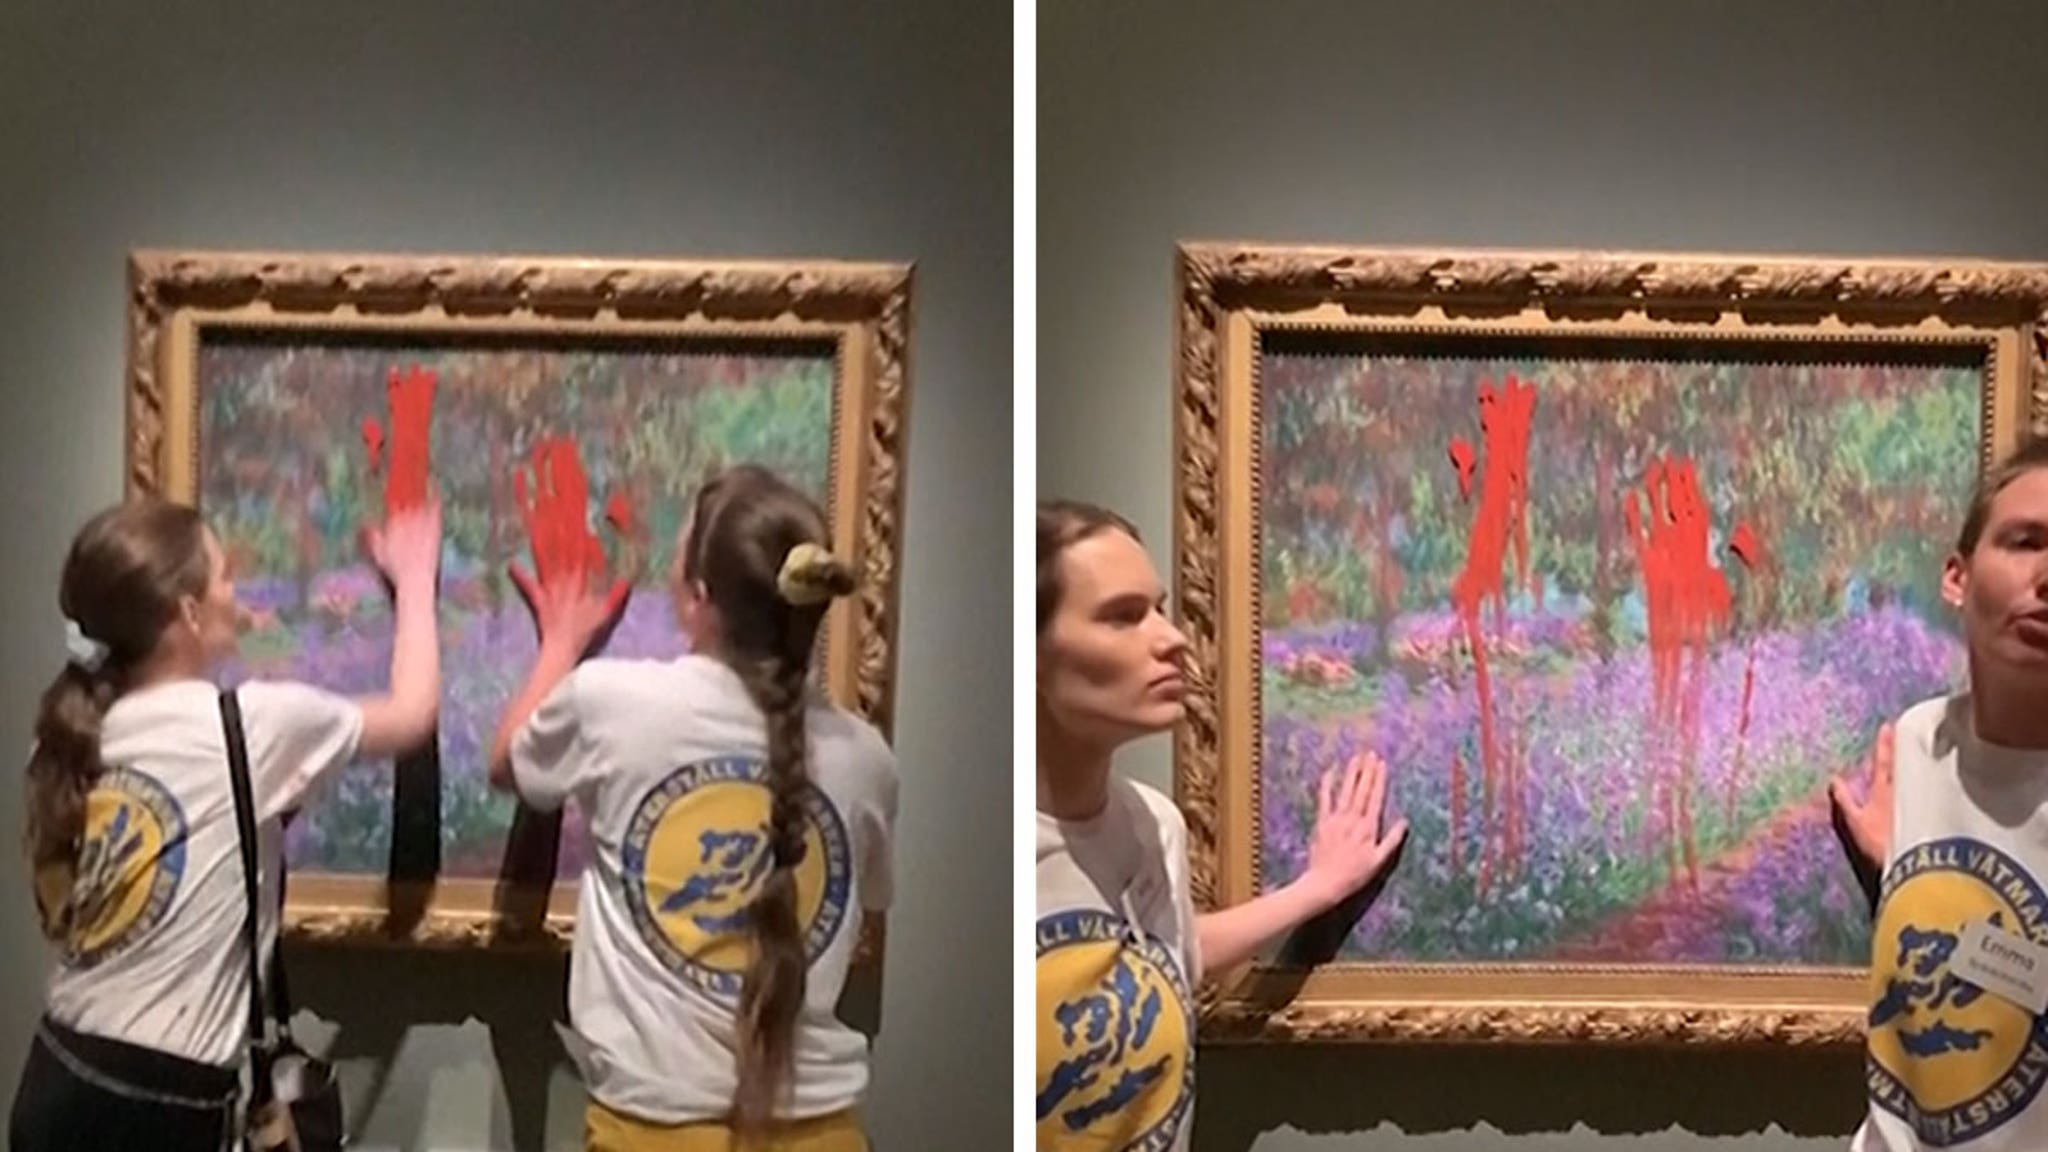 Climate activists detained after sticking hands and smearing paint on Monet piece